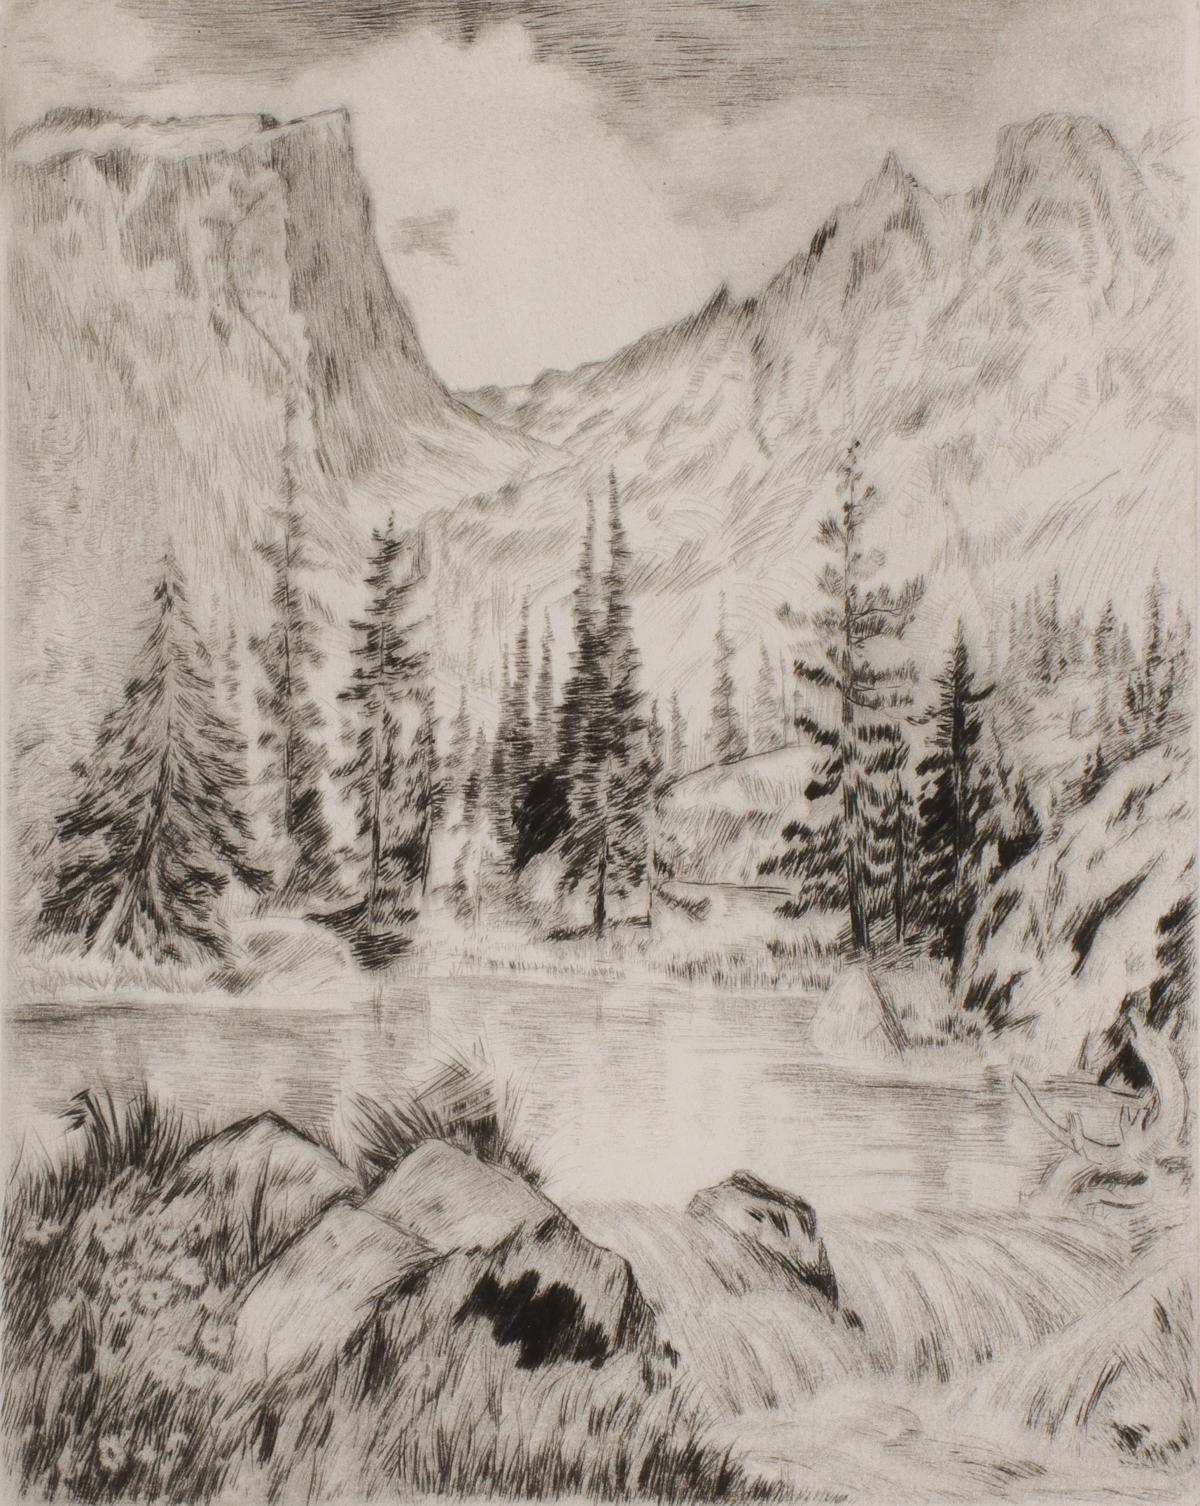 LYMAN BYXBE (1886-1980) PENCIL SIGNED ETCHING